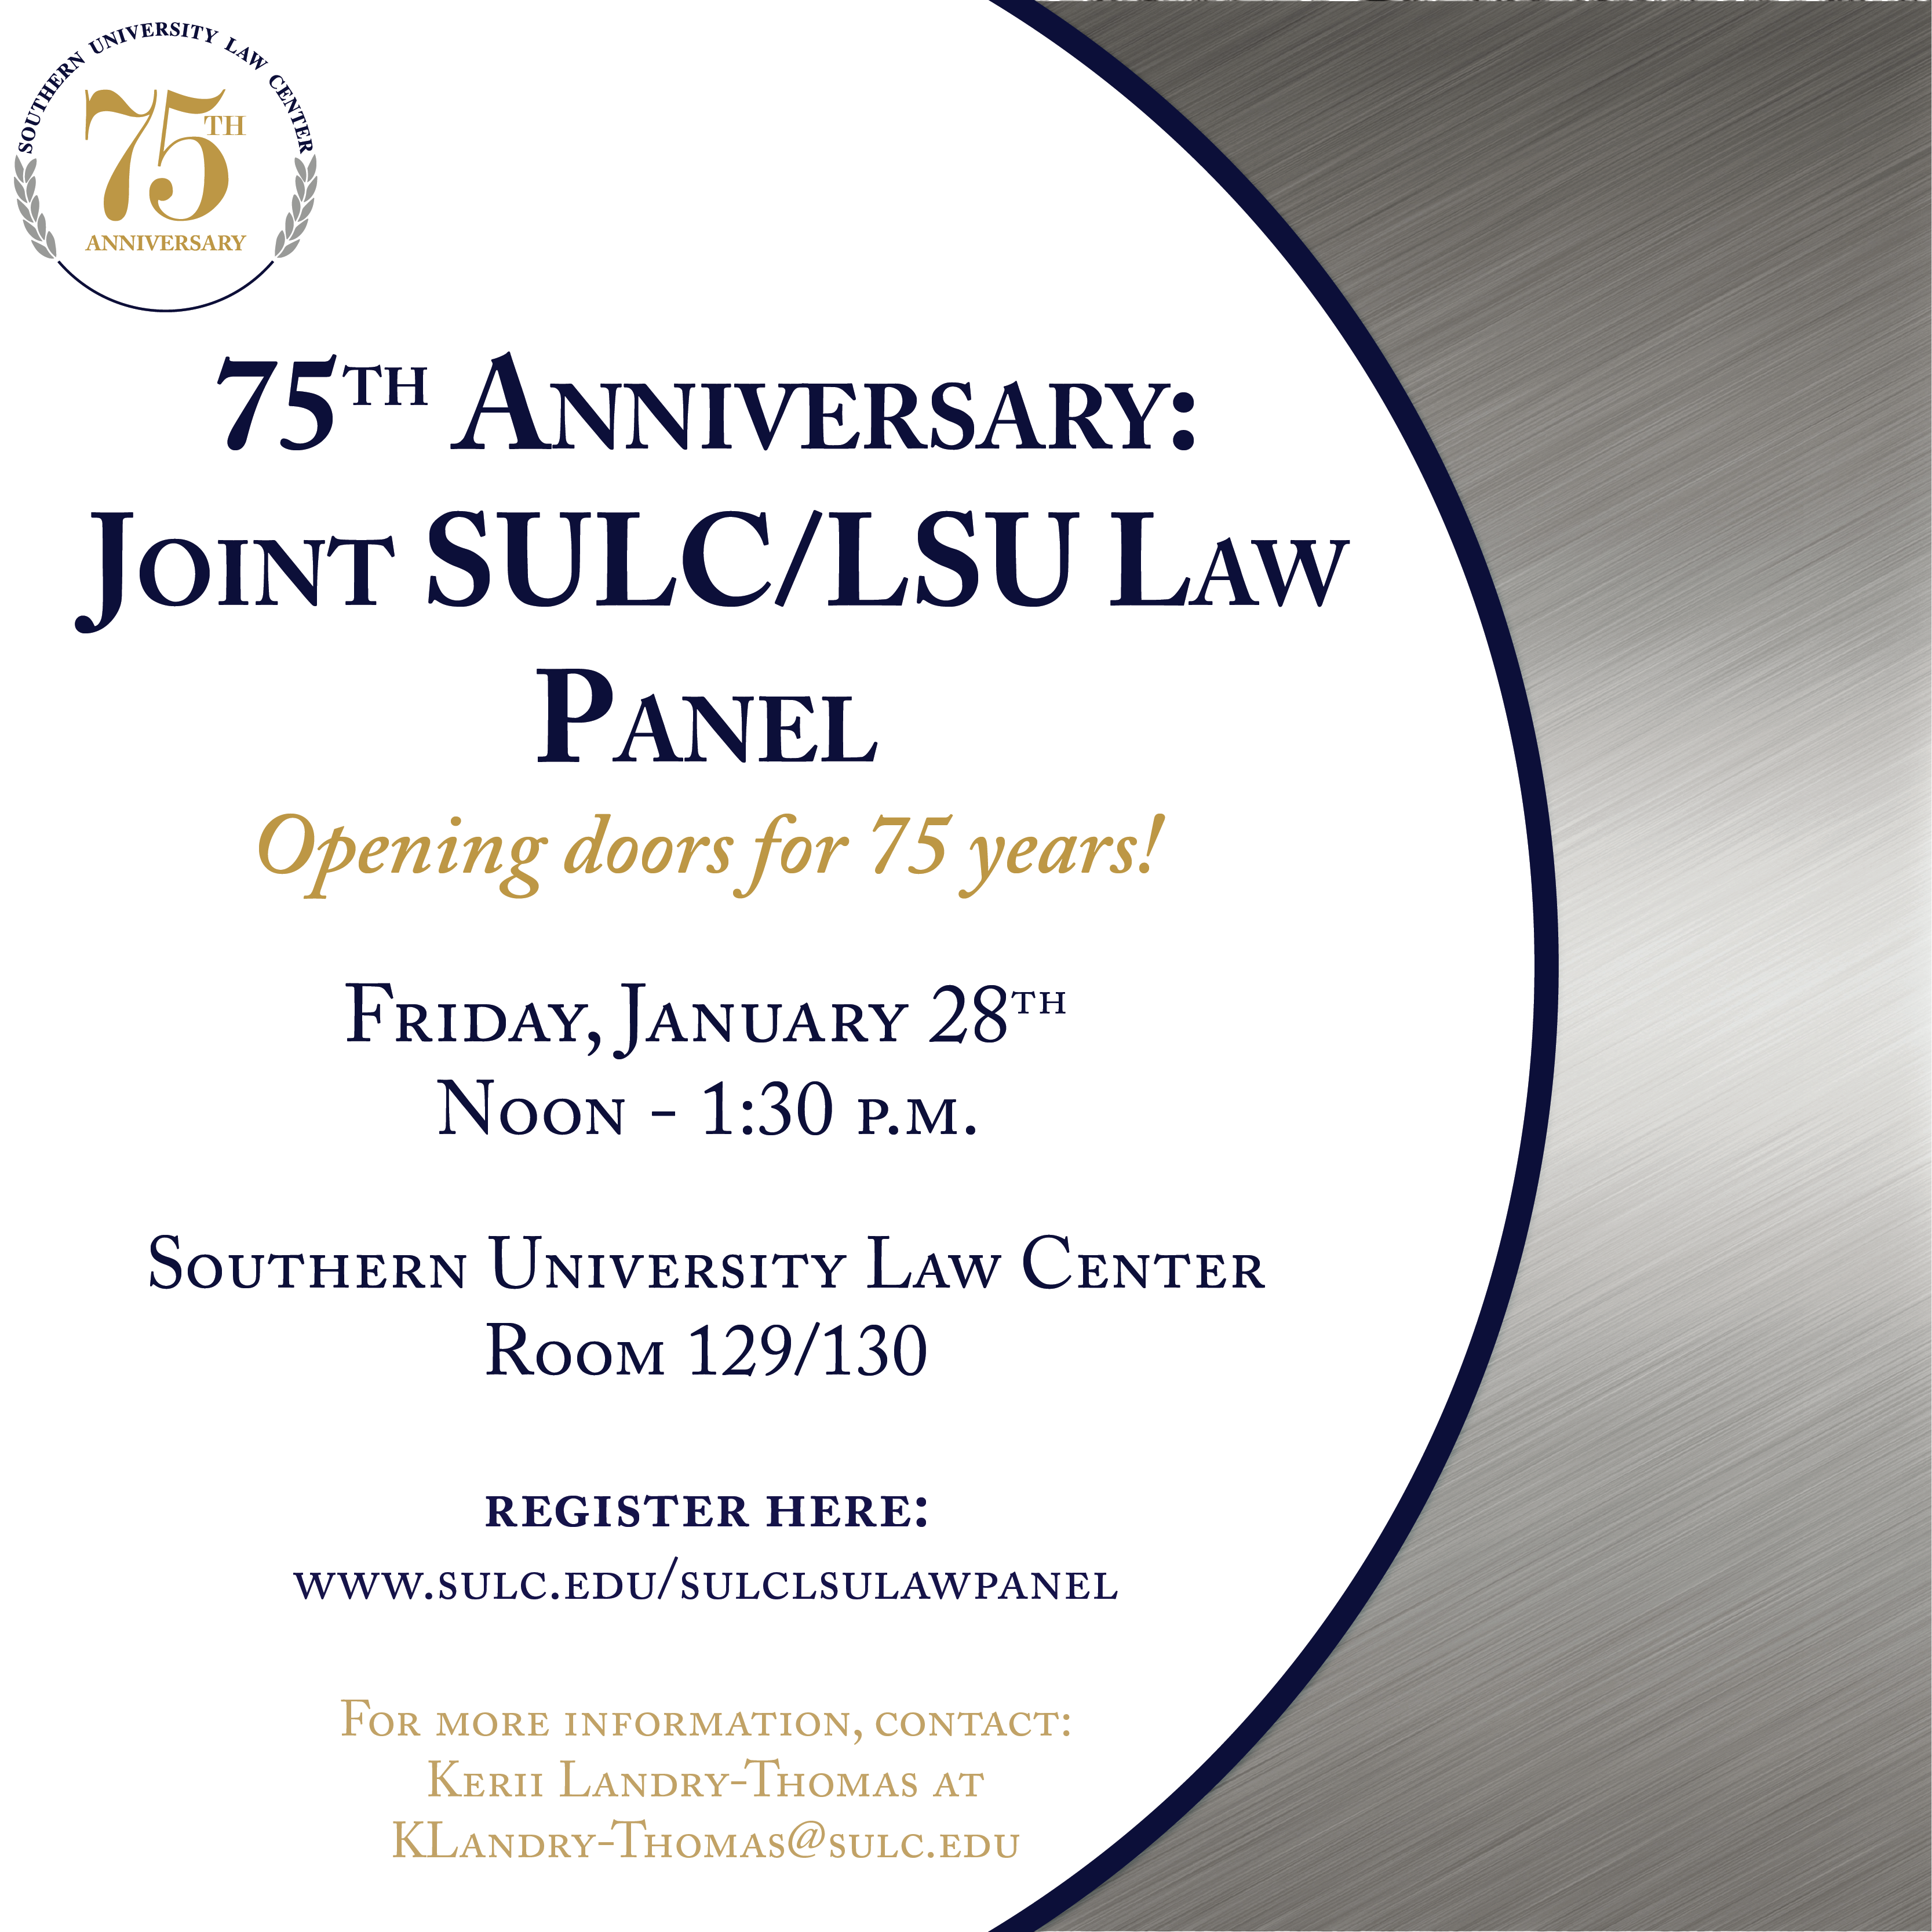 75th Anniversary: Joint SULC/LSU Law Panel